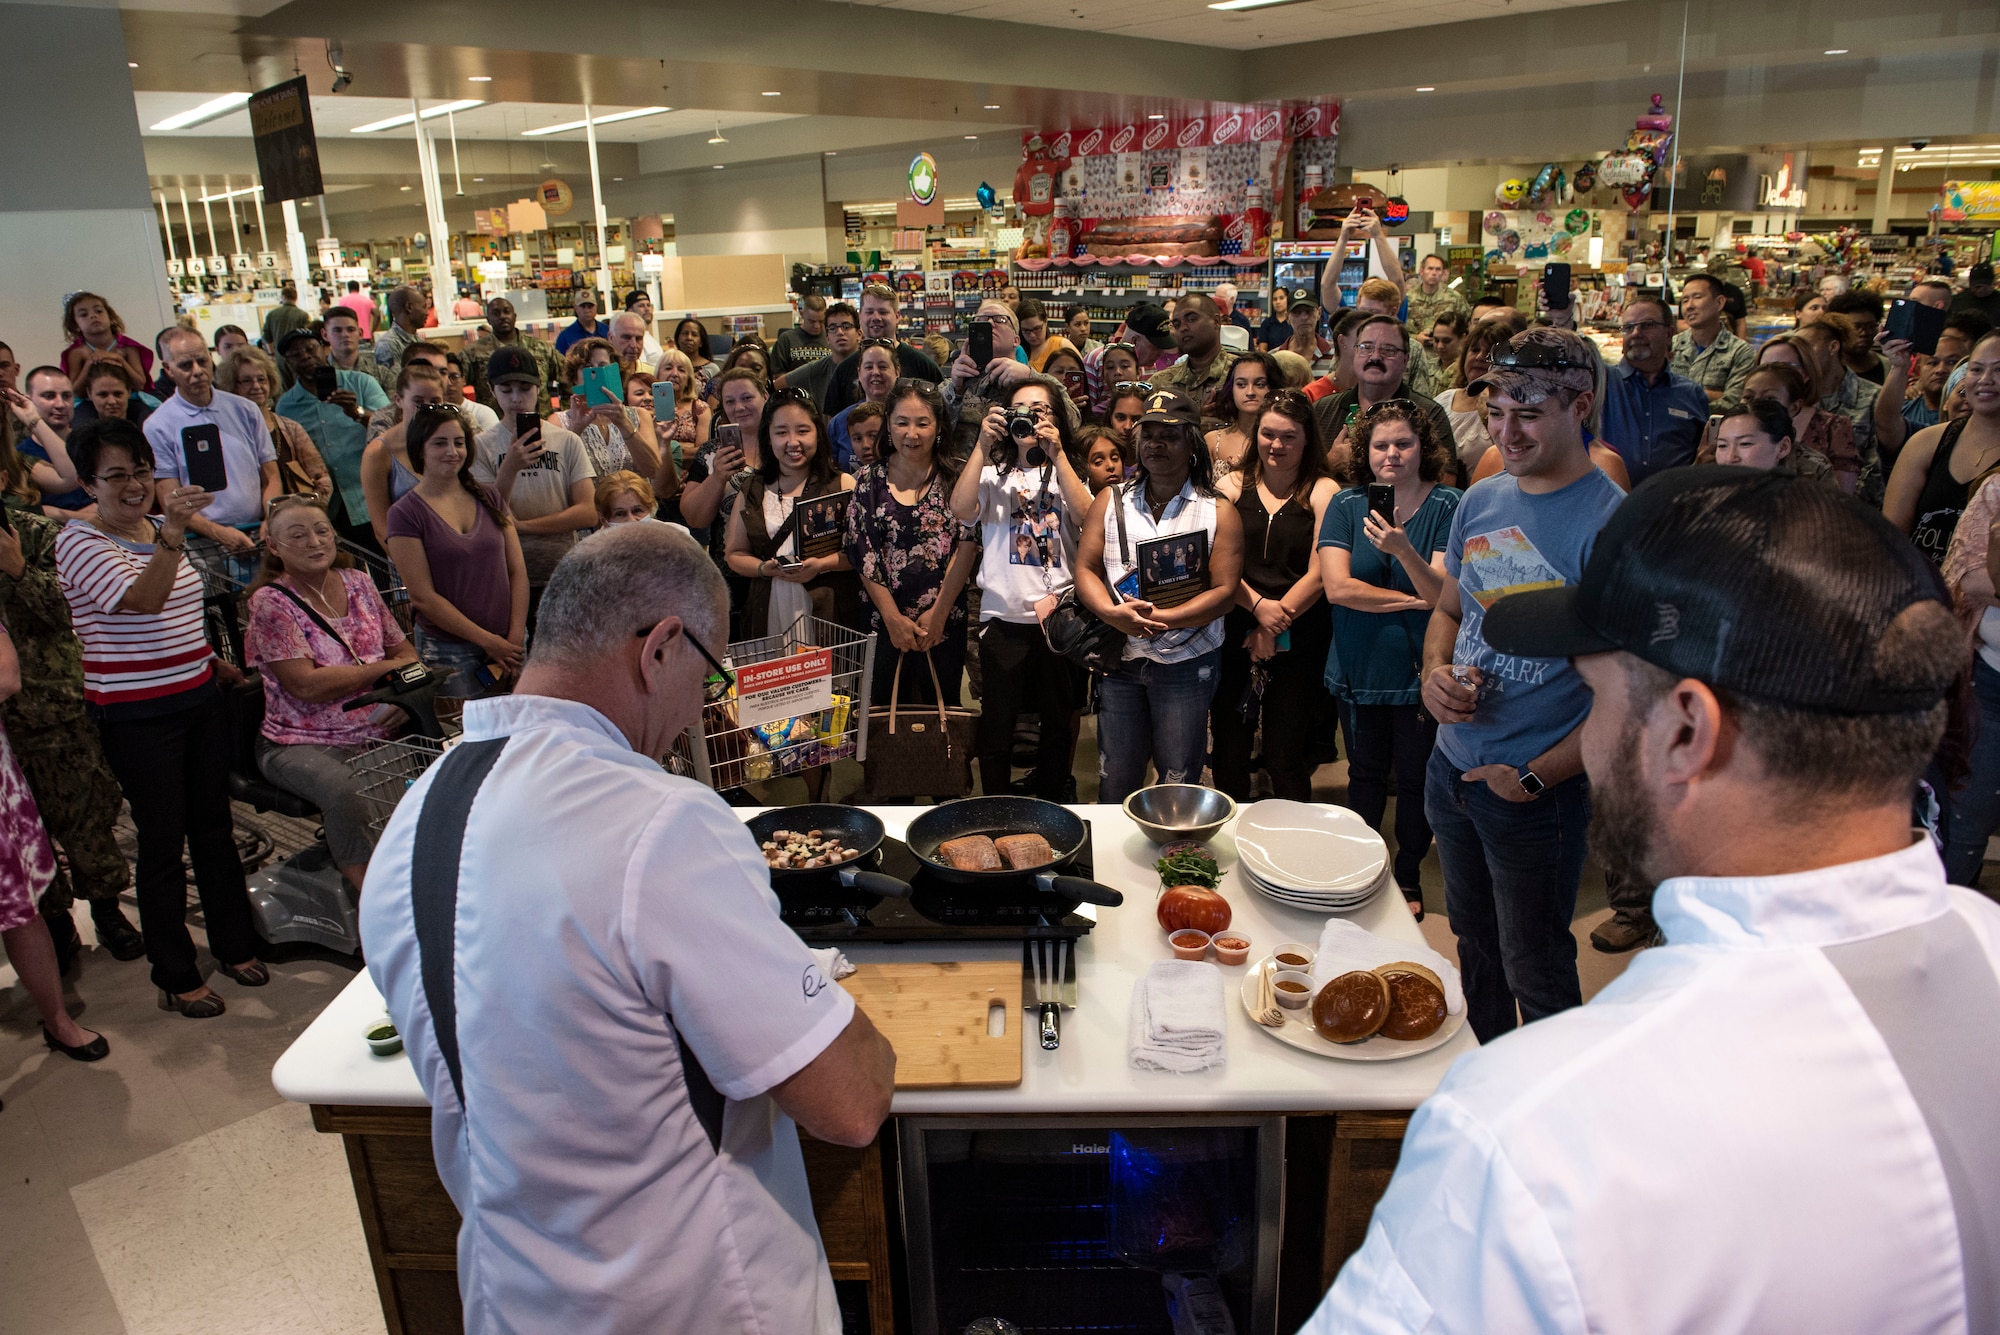 Members of team Nellis look on as celebrity chef Robert Irvine prepares a dish at the Nellis Commissary on Nellis Air Force Base, Nev., July 19, 2019.